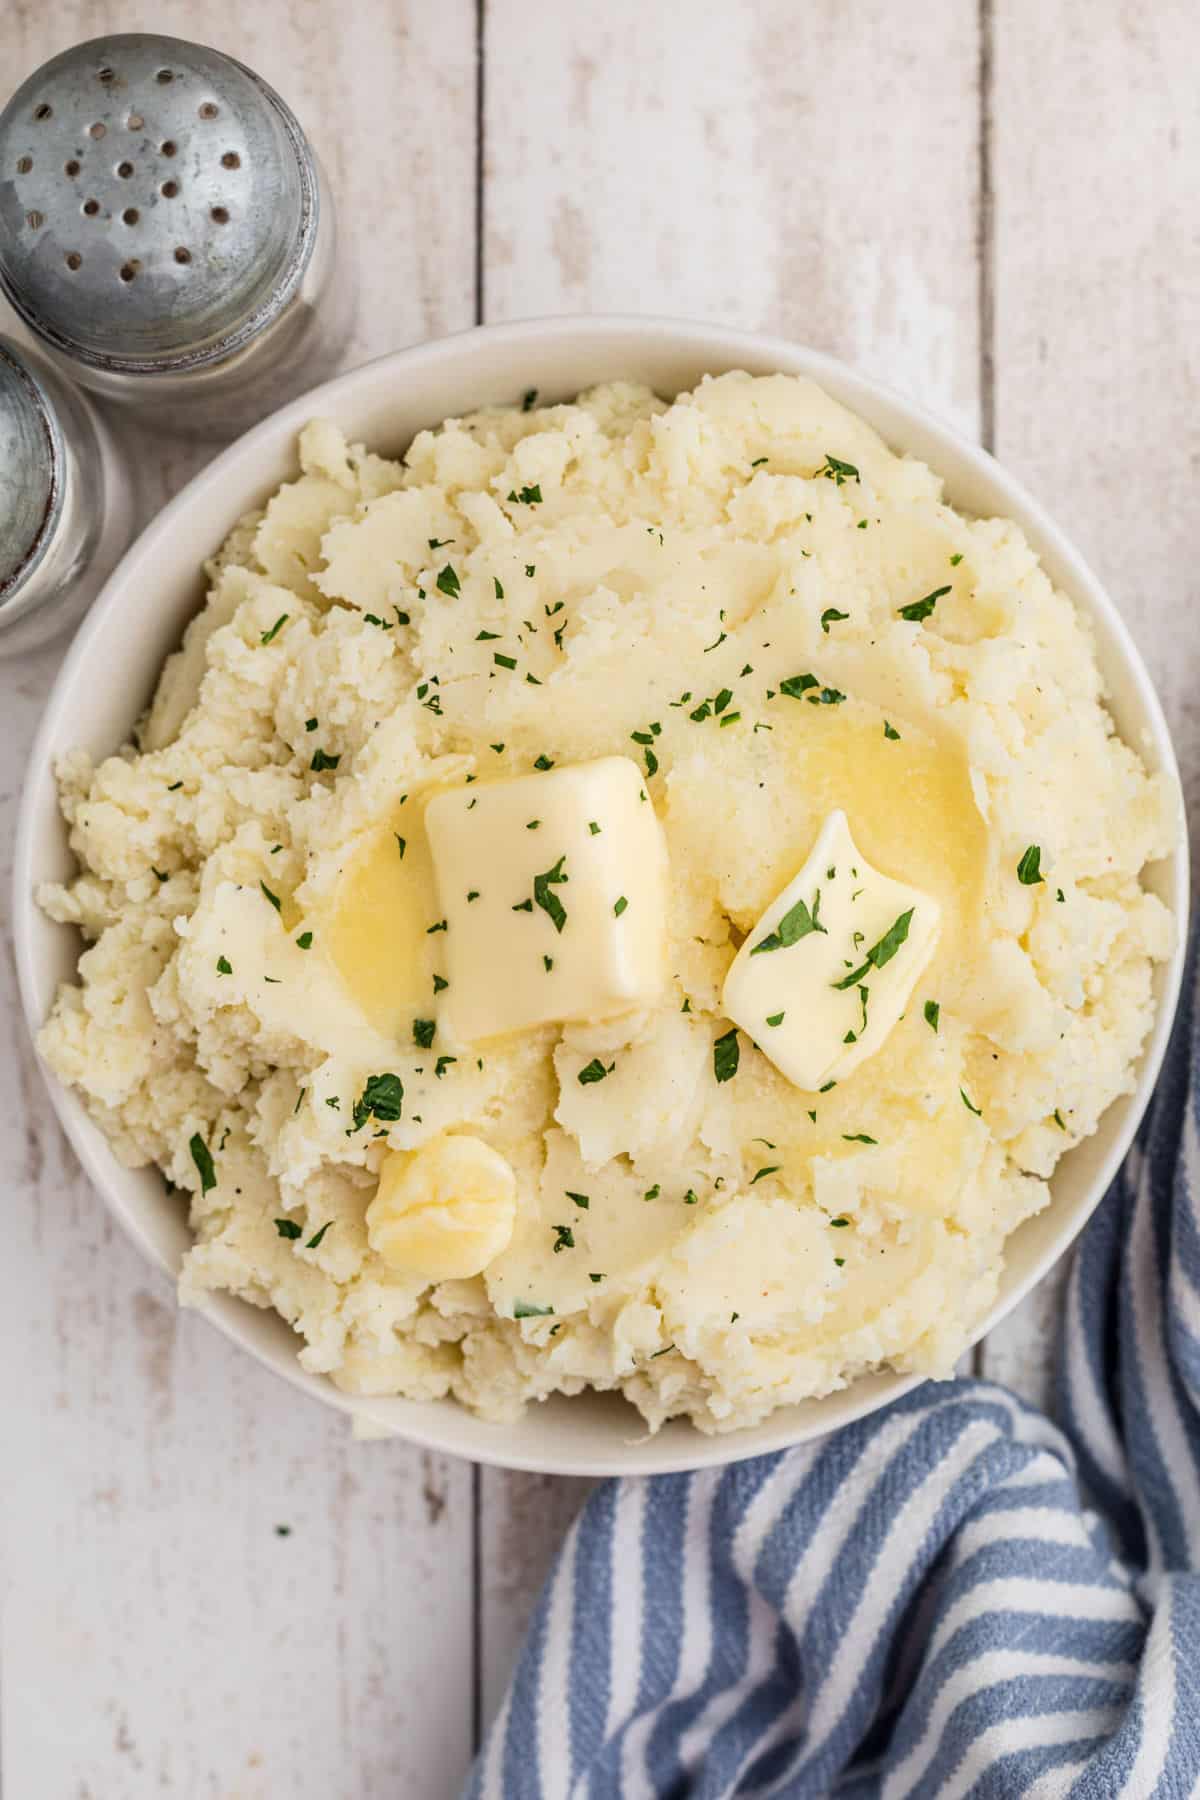 Overhead shot of a full bowl of mashed potatoes with butter melting on top.